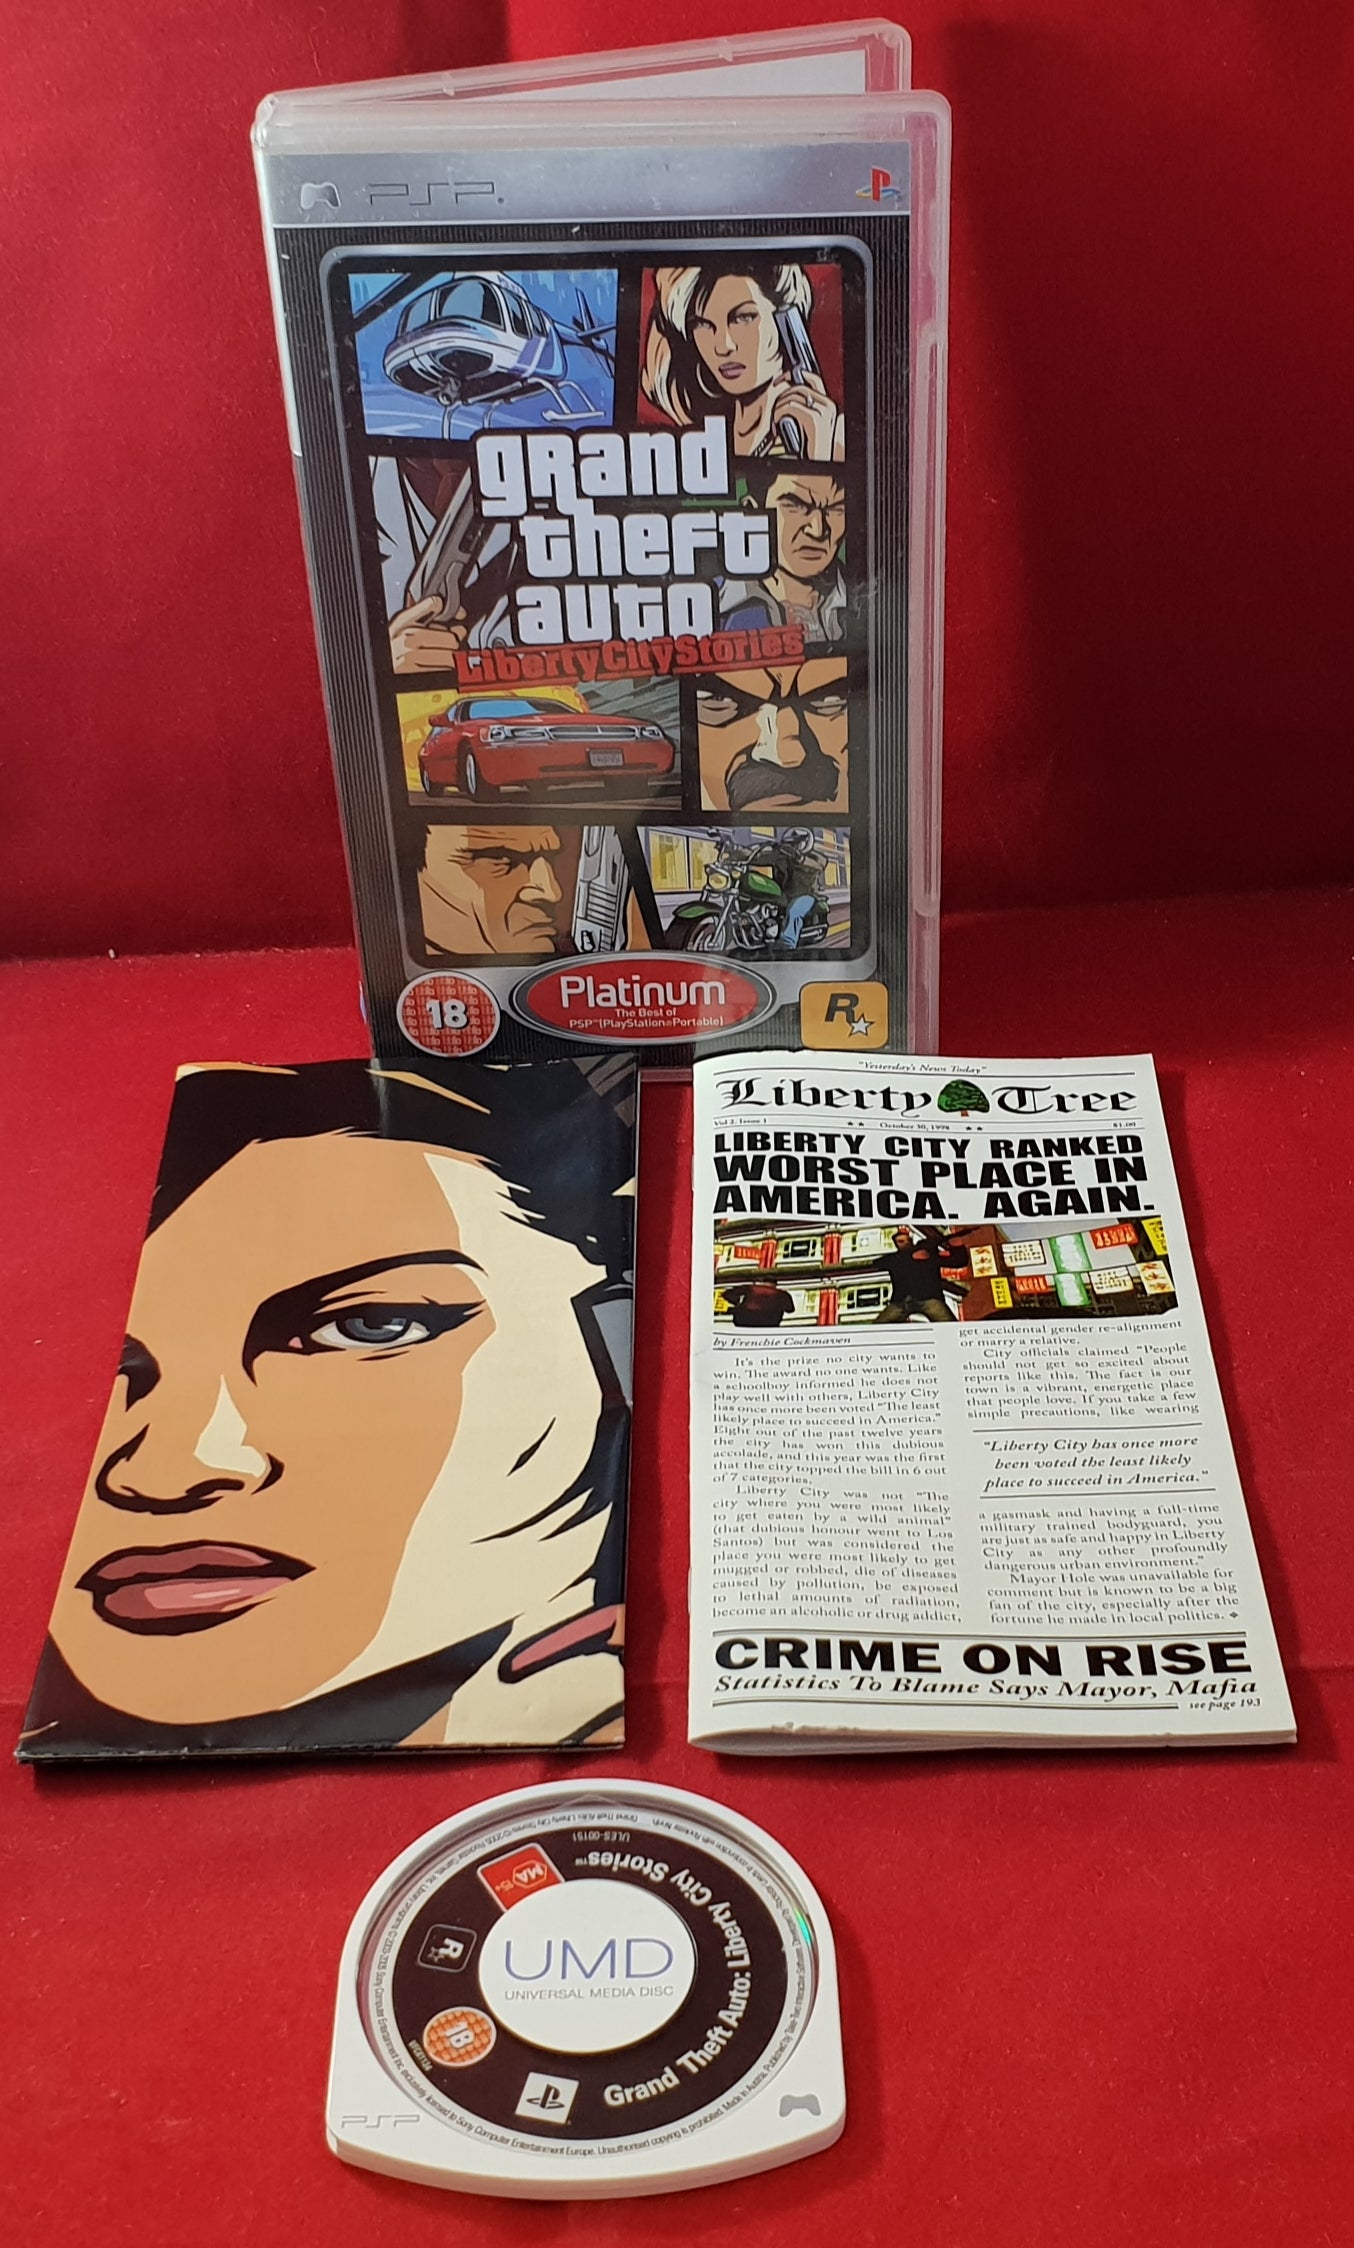 Grand Theft Auto Liberty City Stories Platinum with Map Sony PSP Game